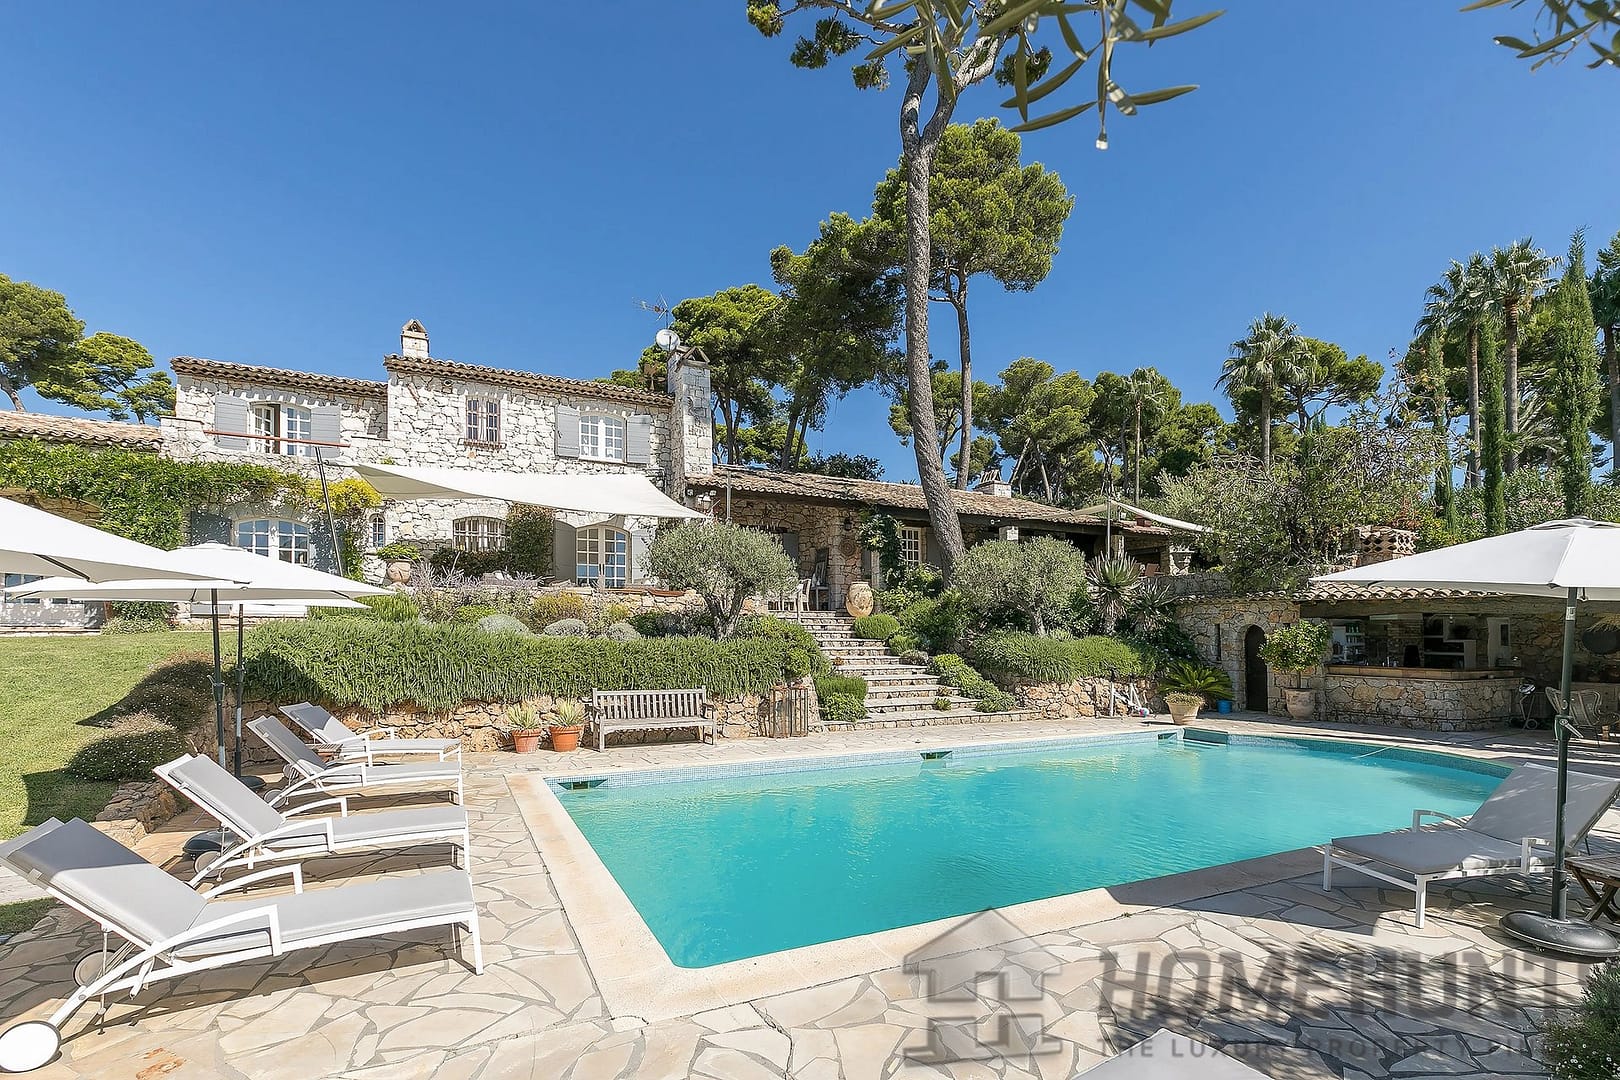 Villa/House For Sale in Antibes 16